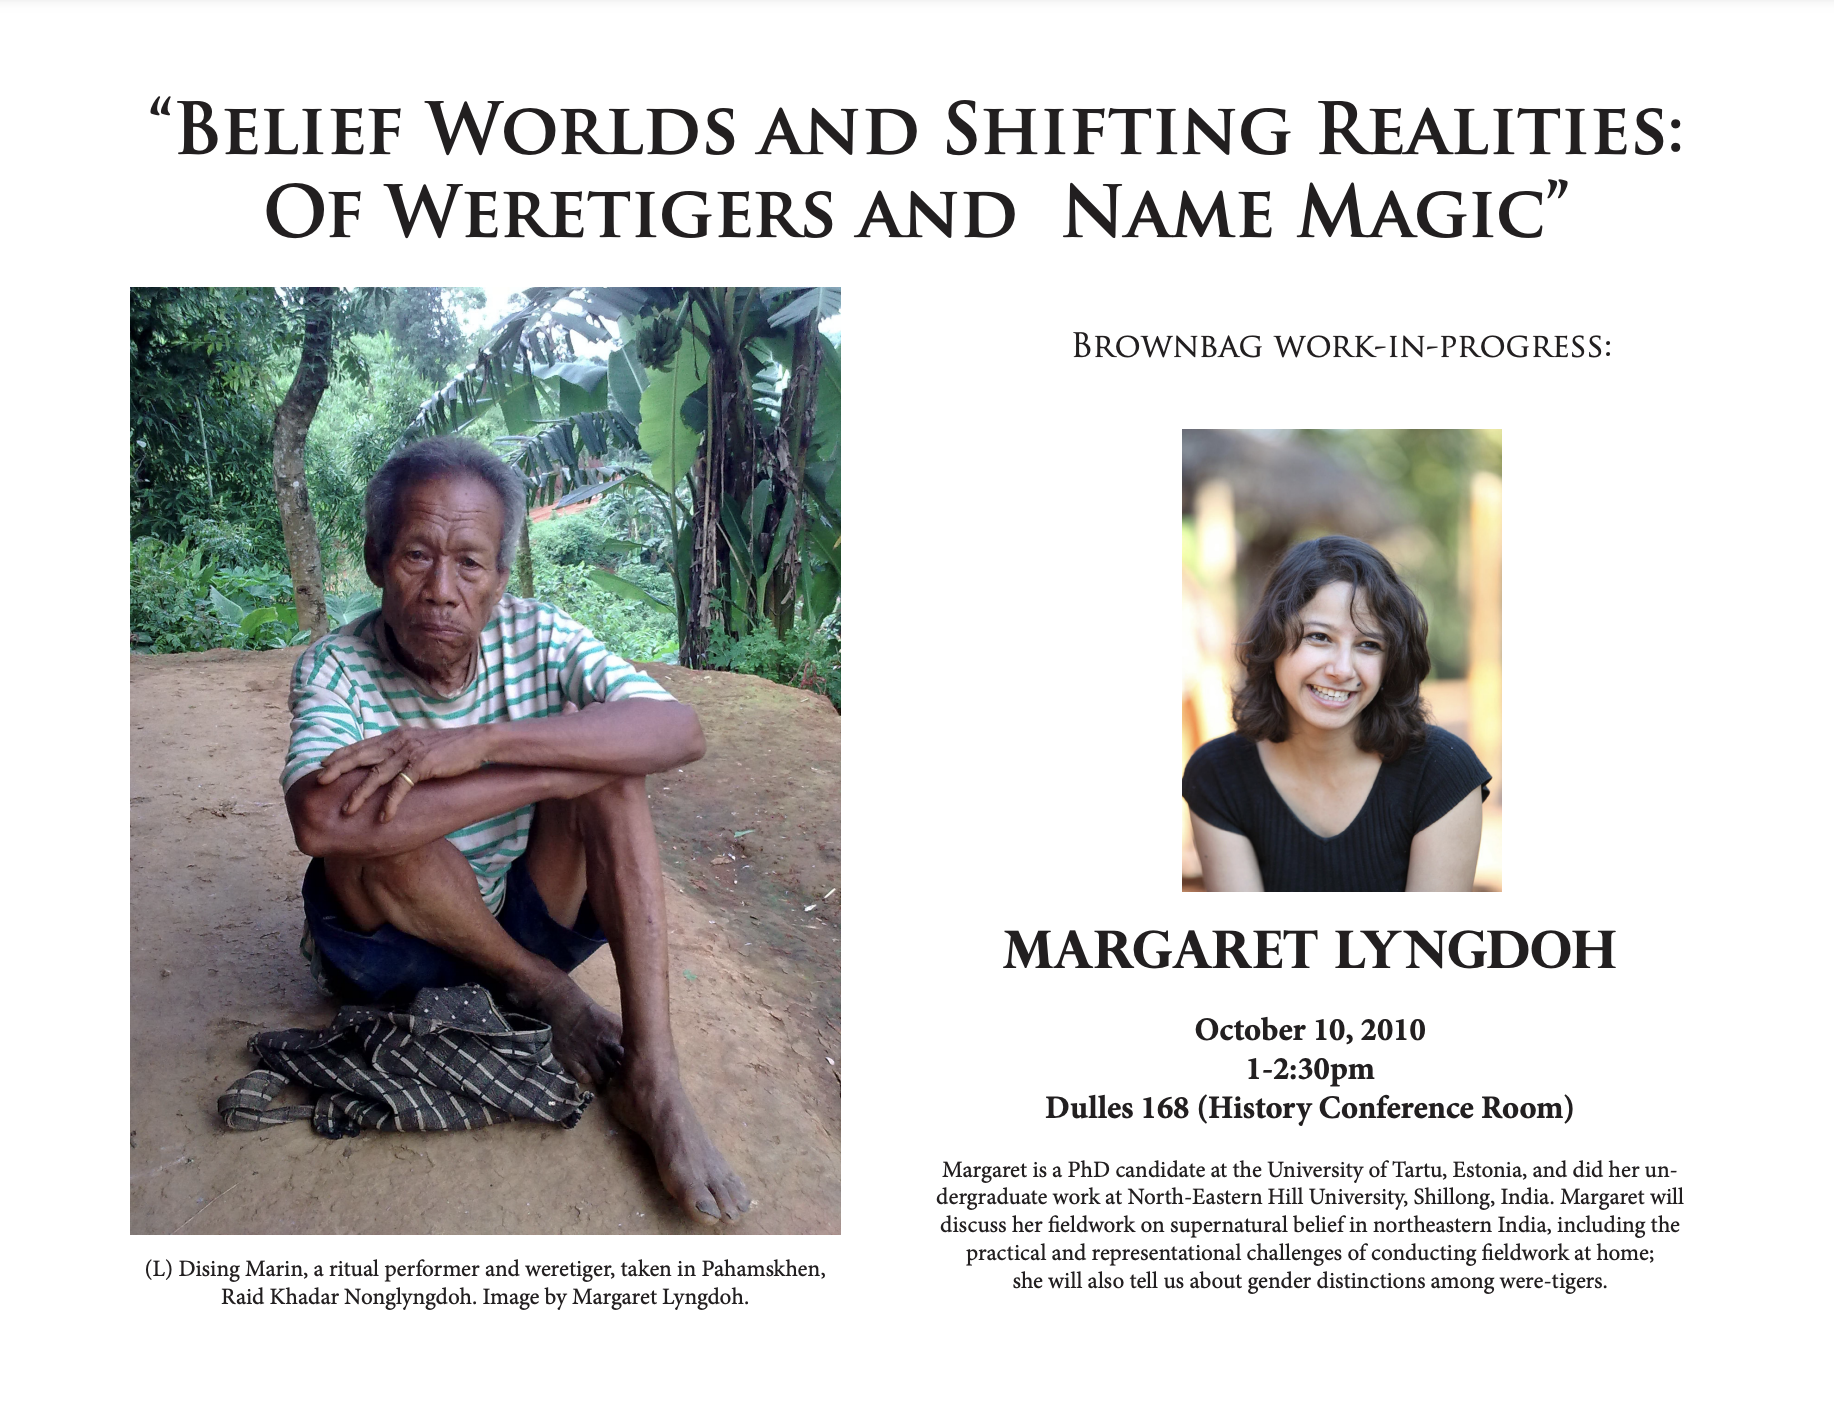 “Belief Worlds and Shifting Realities: Of Weretigers and Name Magic” Flyer